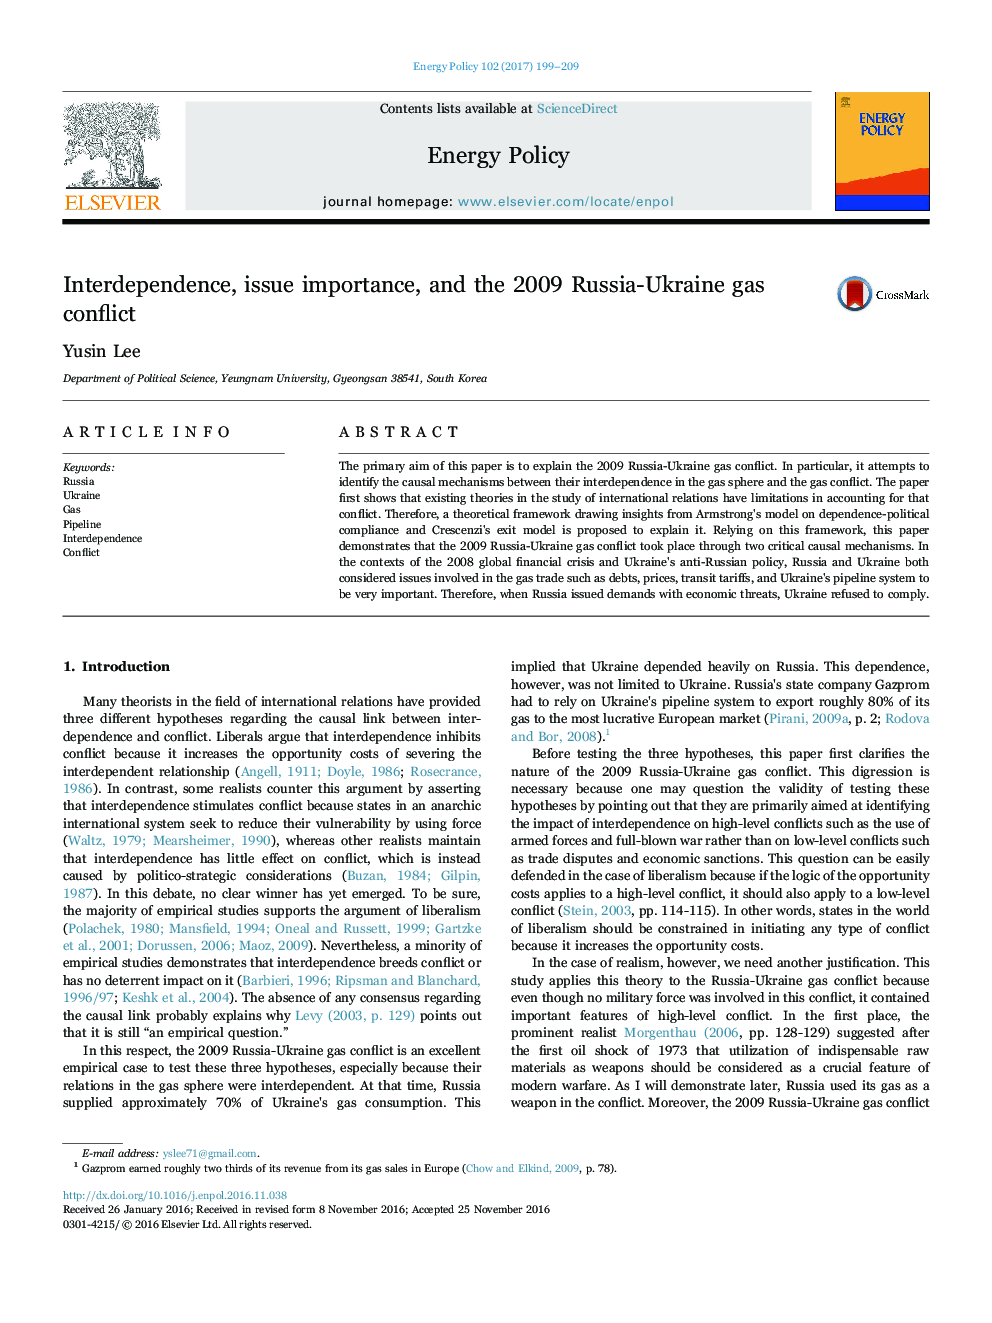 Interdependence, issue importance, and the 2009 Russia-Ukraine gas conflict